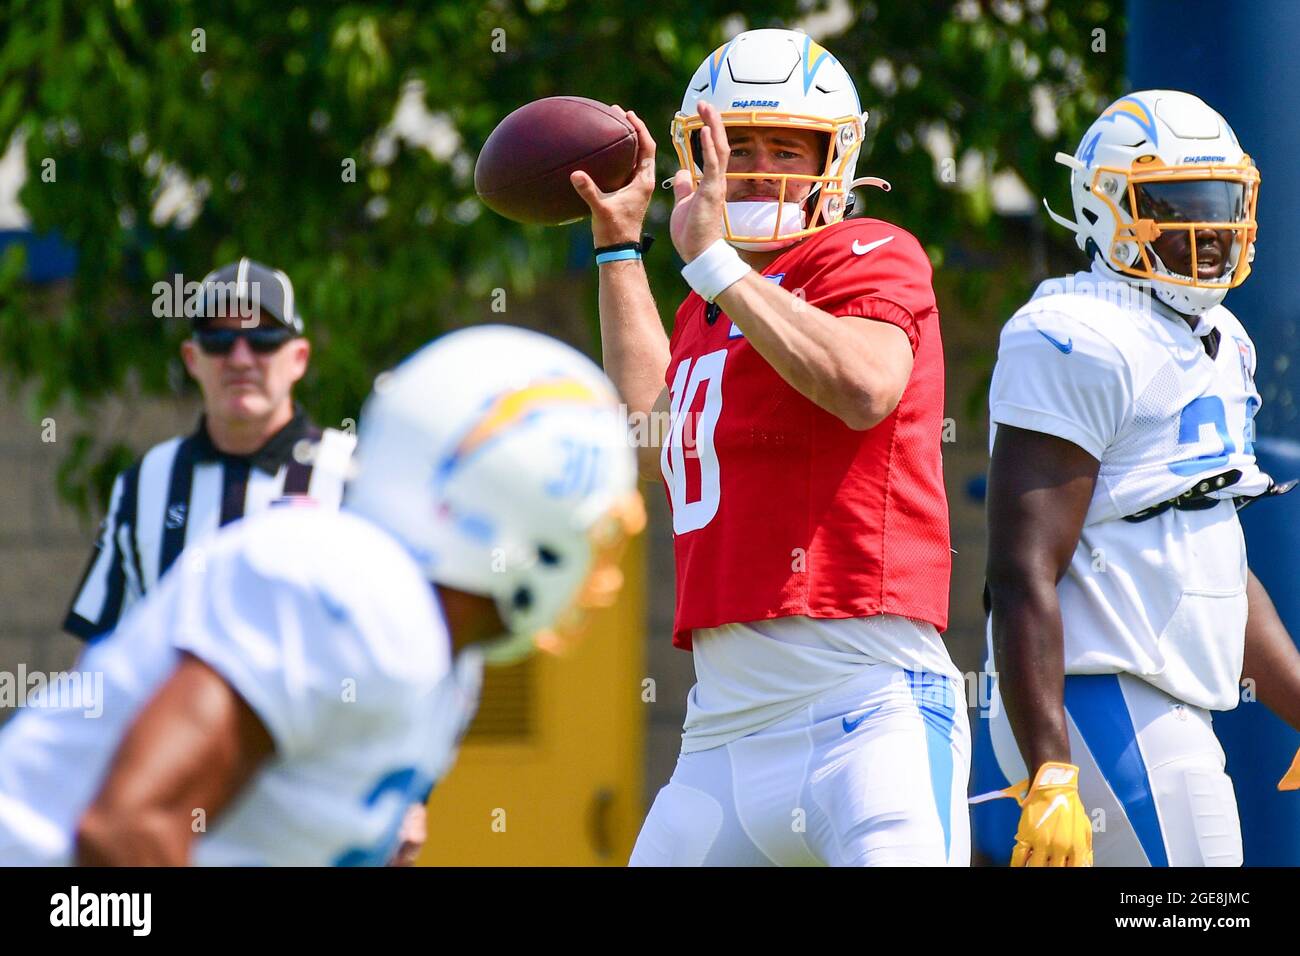 Los Angeles Chargers quarterback Justin Herbert (10) throws the ball to running back Austin Ekeler (30) during training camp on Tuesday, Aug 17, 2021, Stock Photo